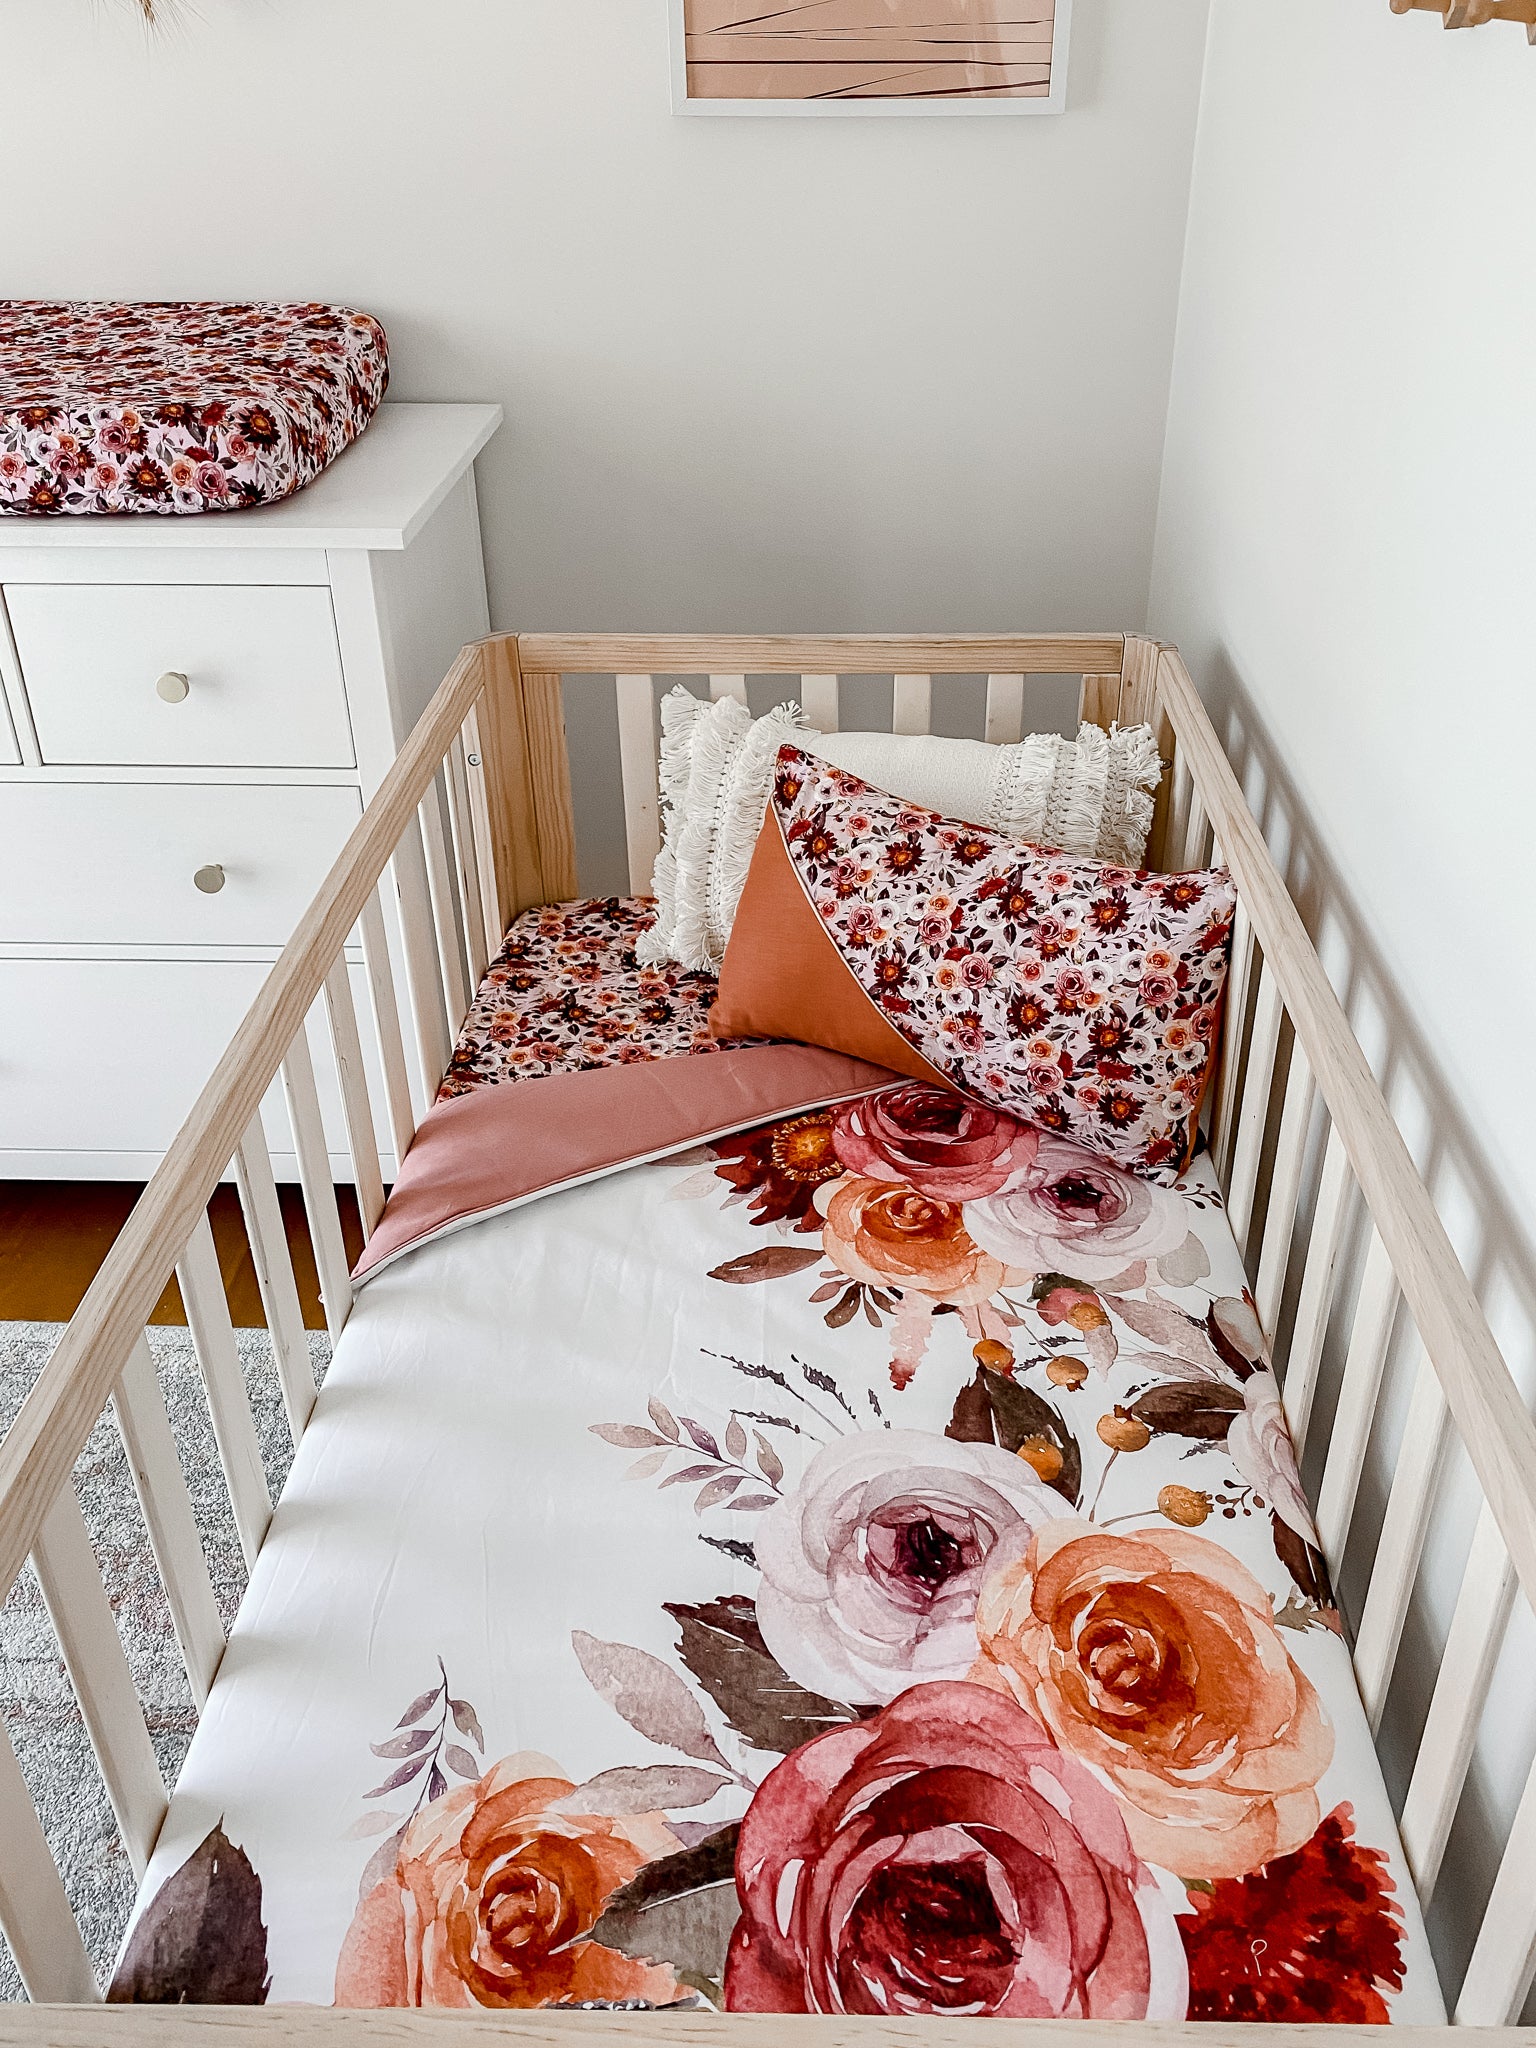 Baby quilt with beautiful floral design